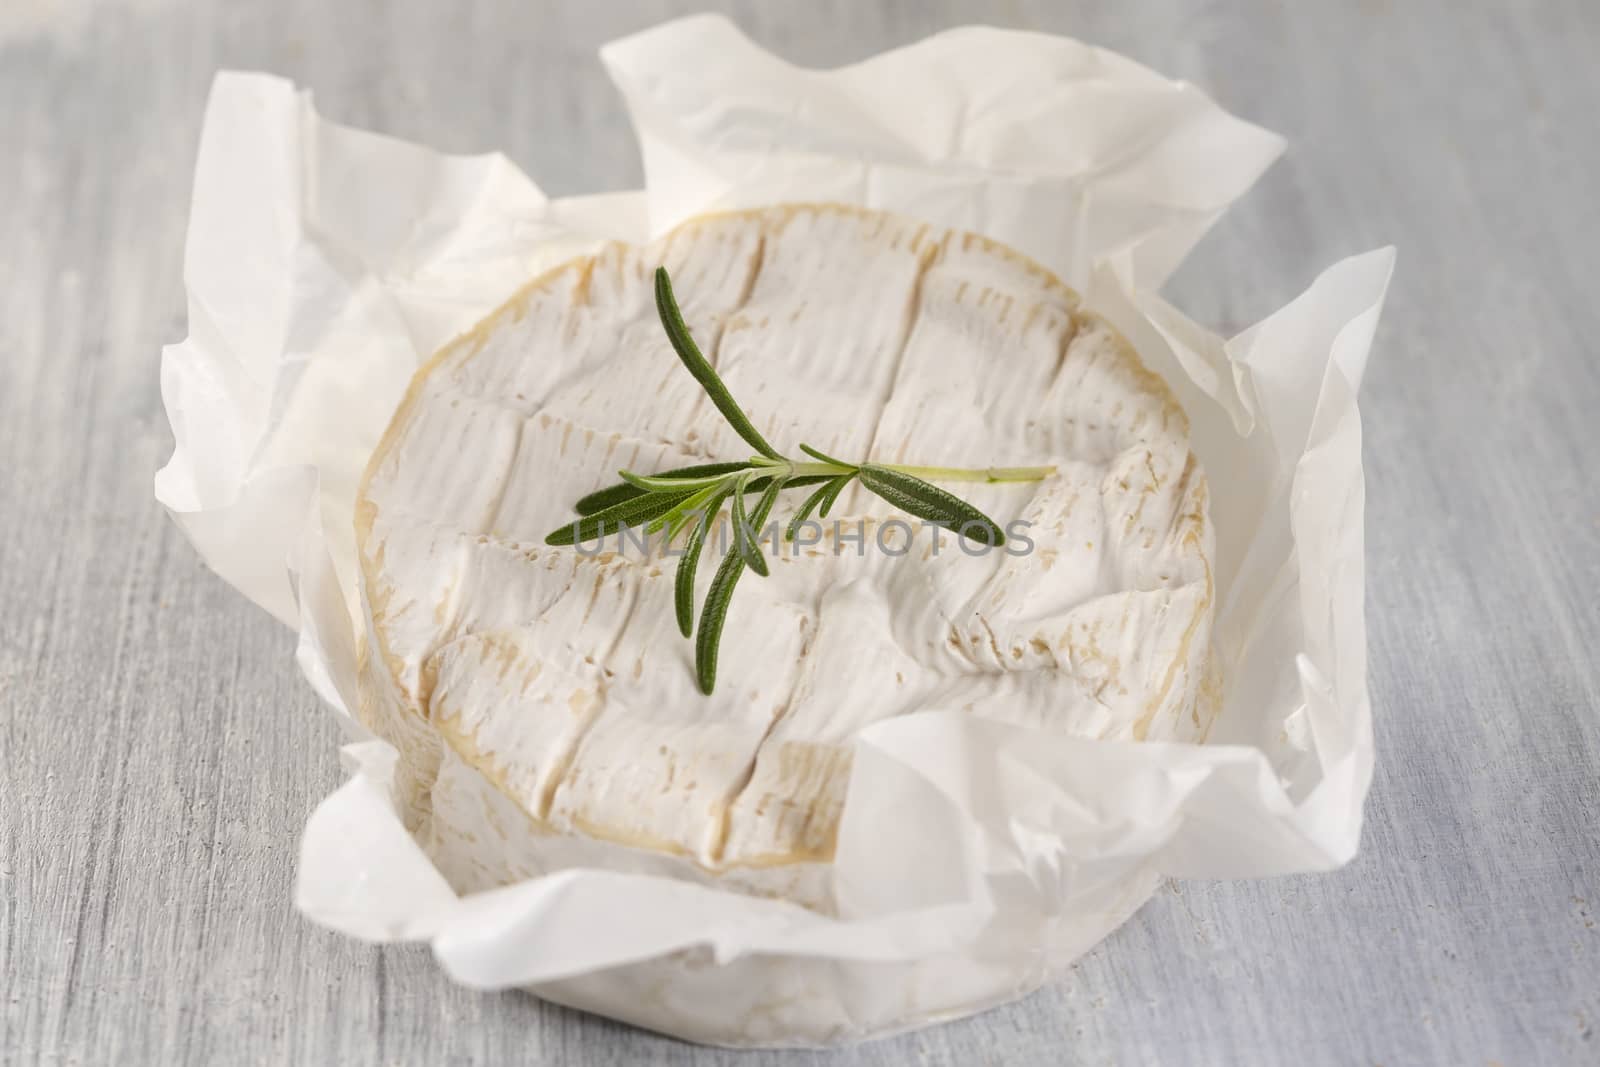 French Camembert cheese from Normandy